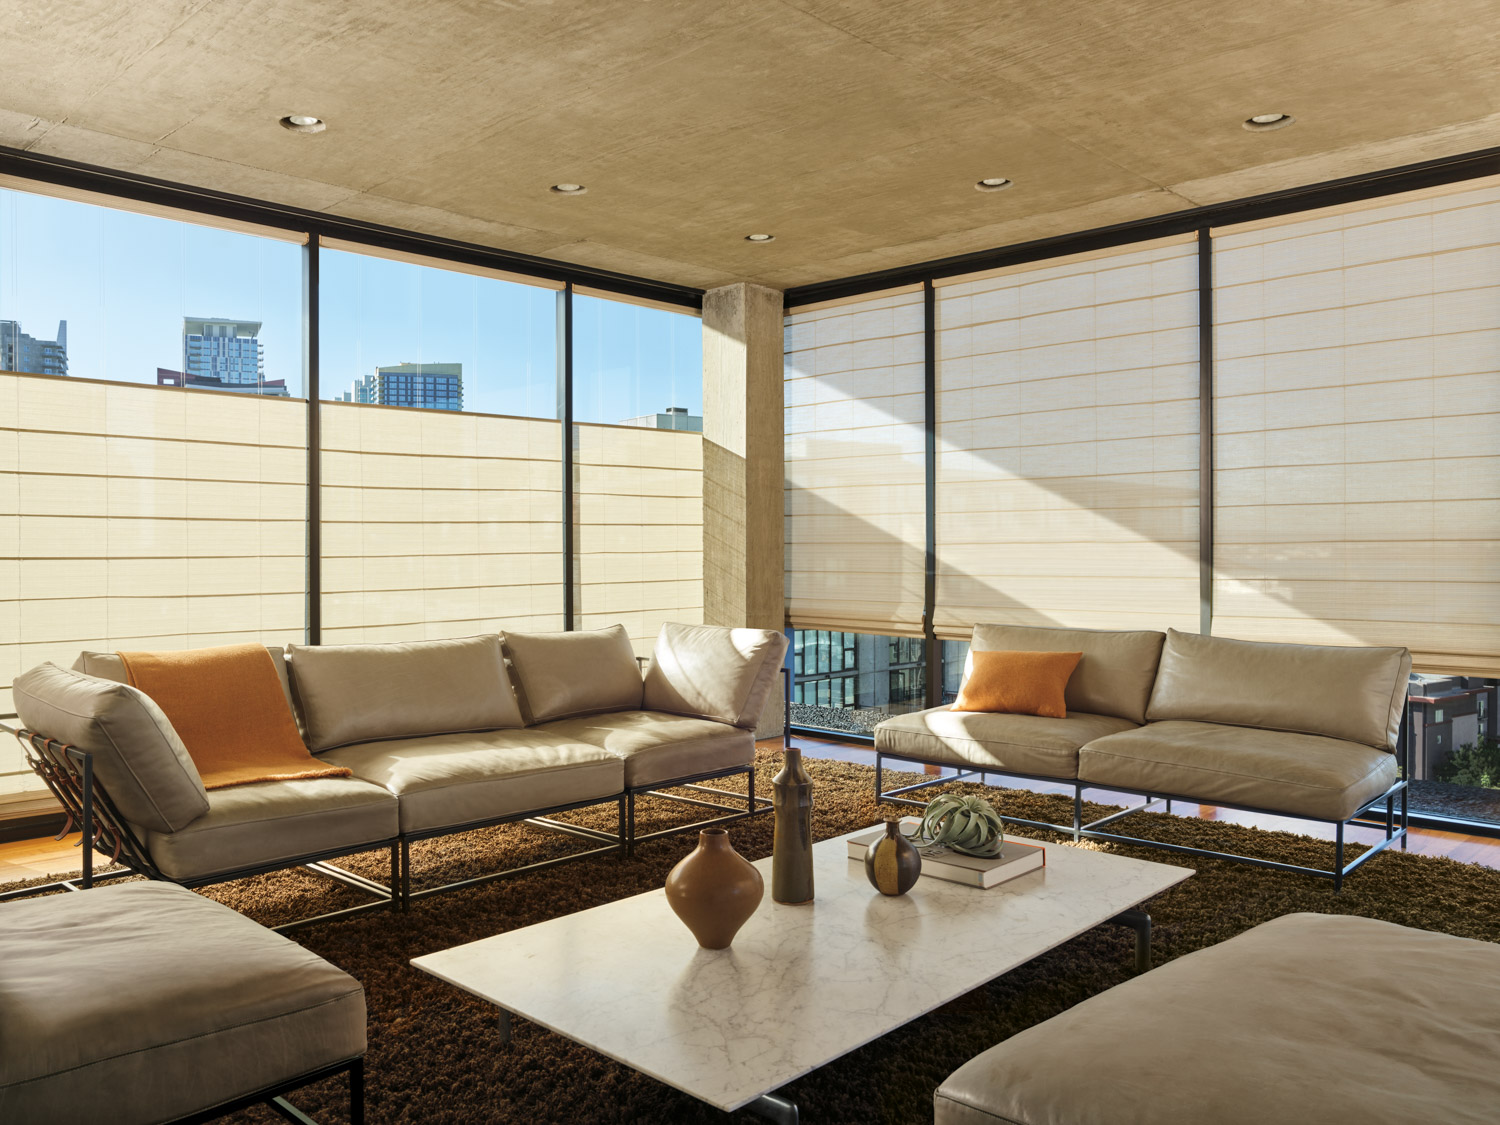 Hunter Douglas Alustra® Woven Textures® Roman Shades in a living room with large windows and furniture.